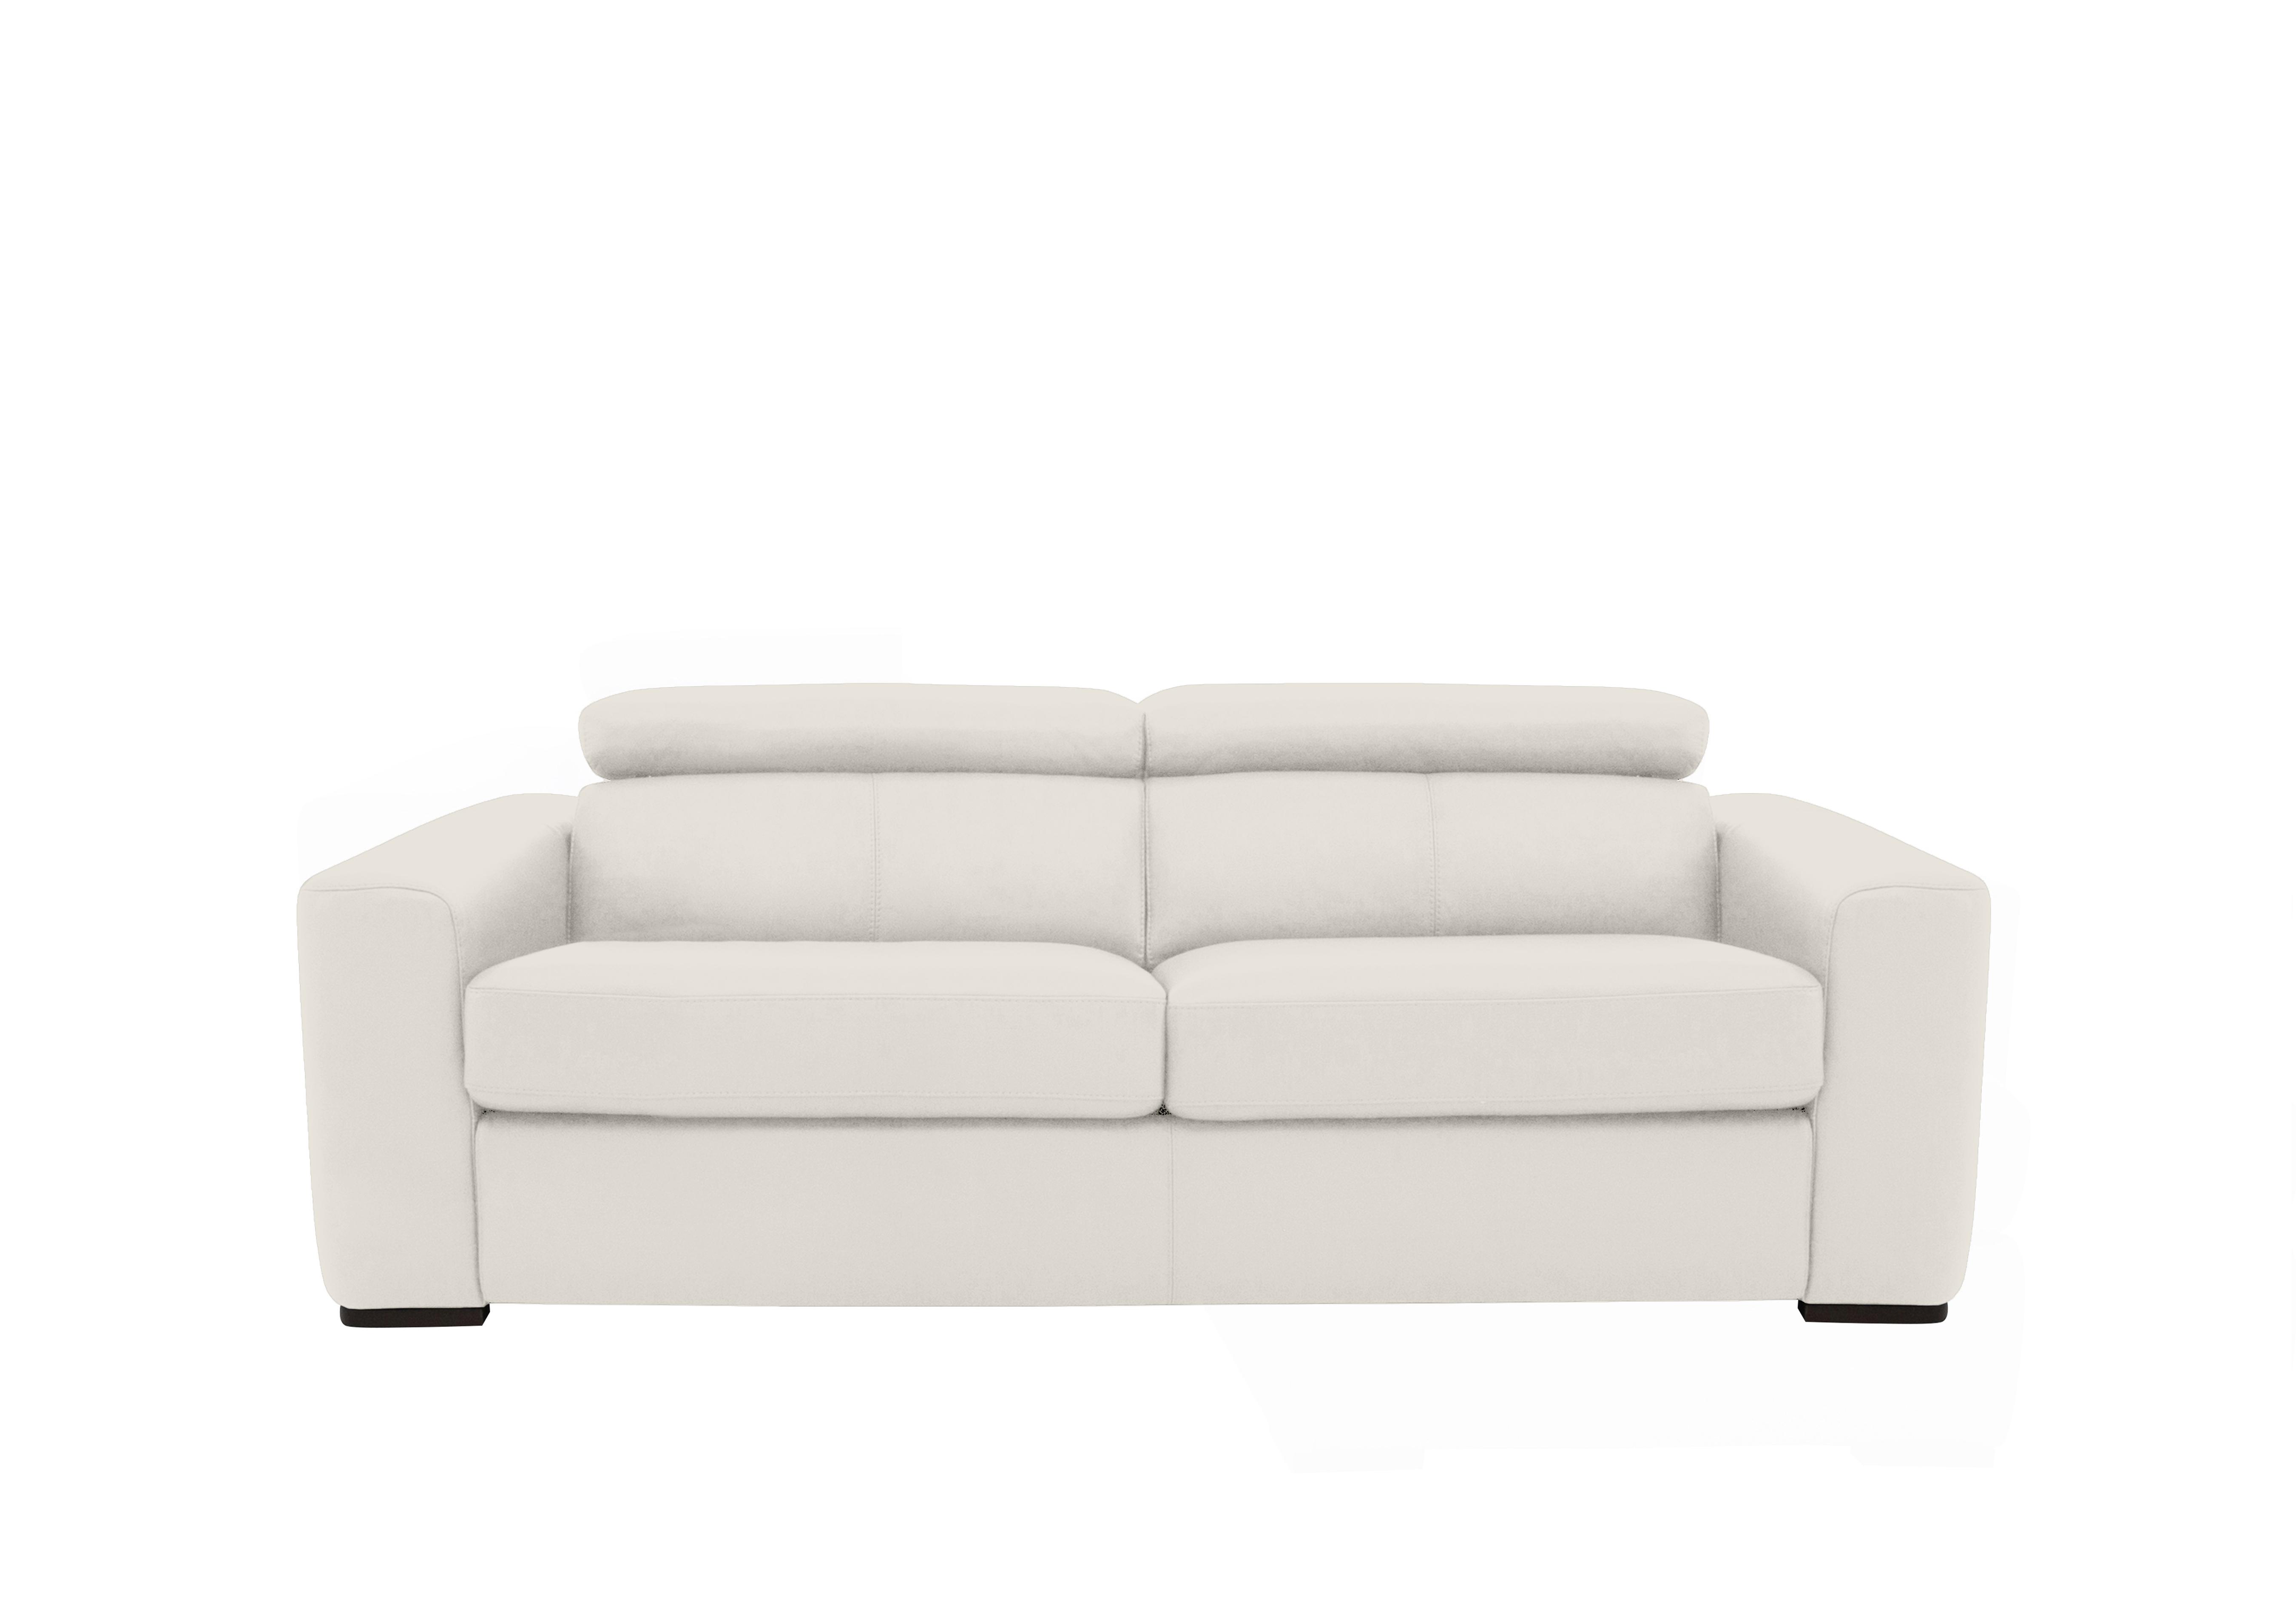 Infinity 3 Seater Leather Sofa in Bv-744d Star White on Furniture Village